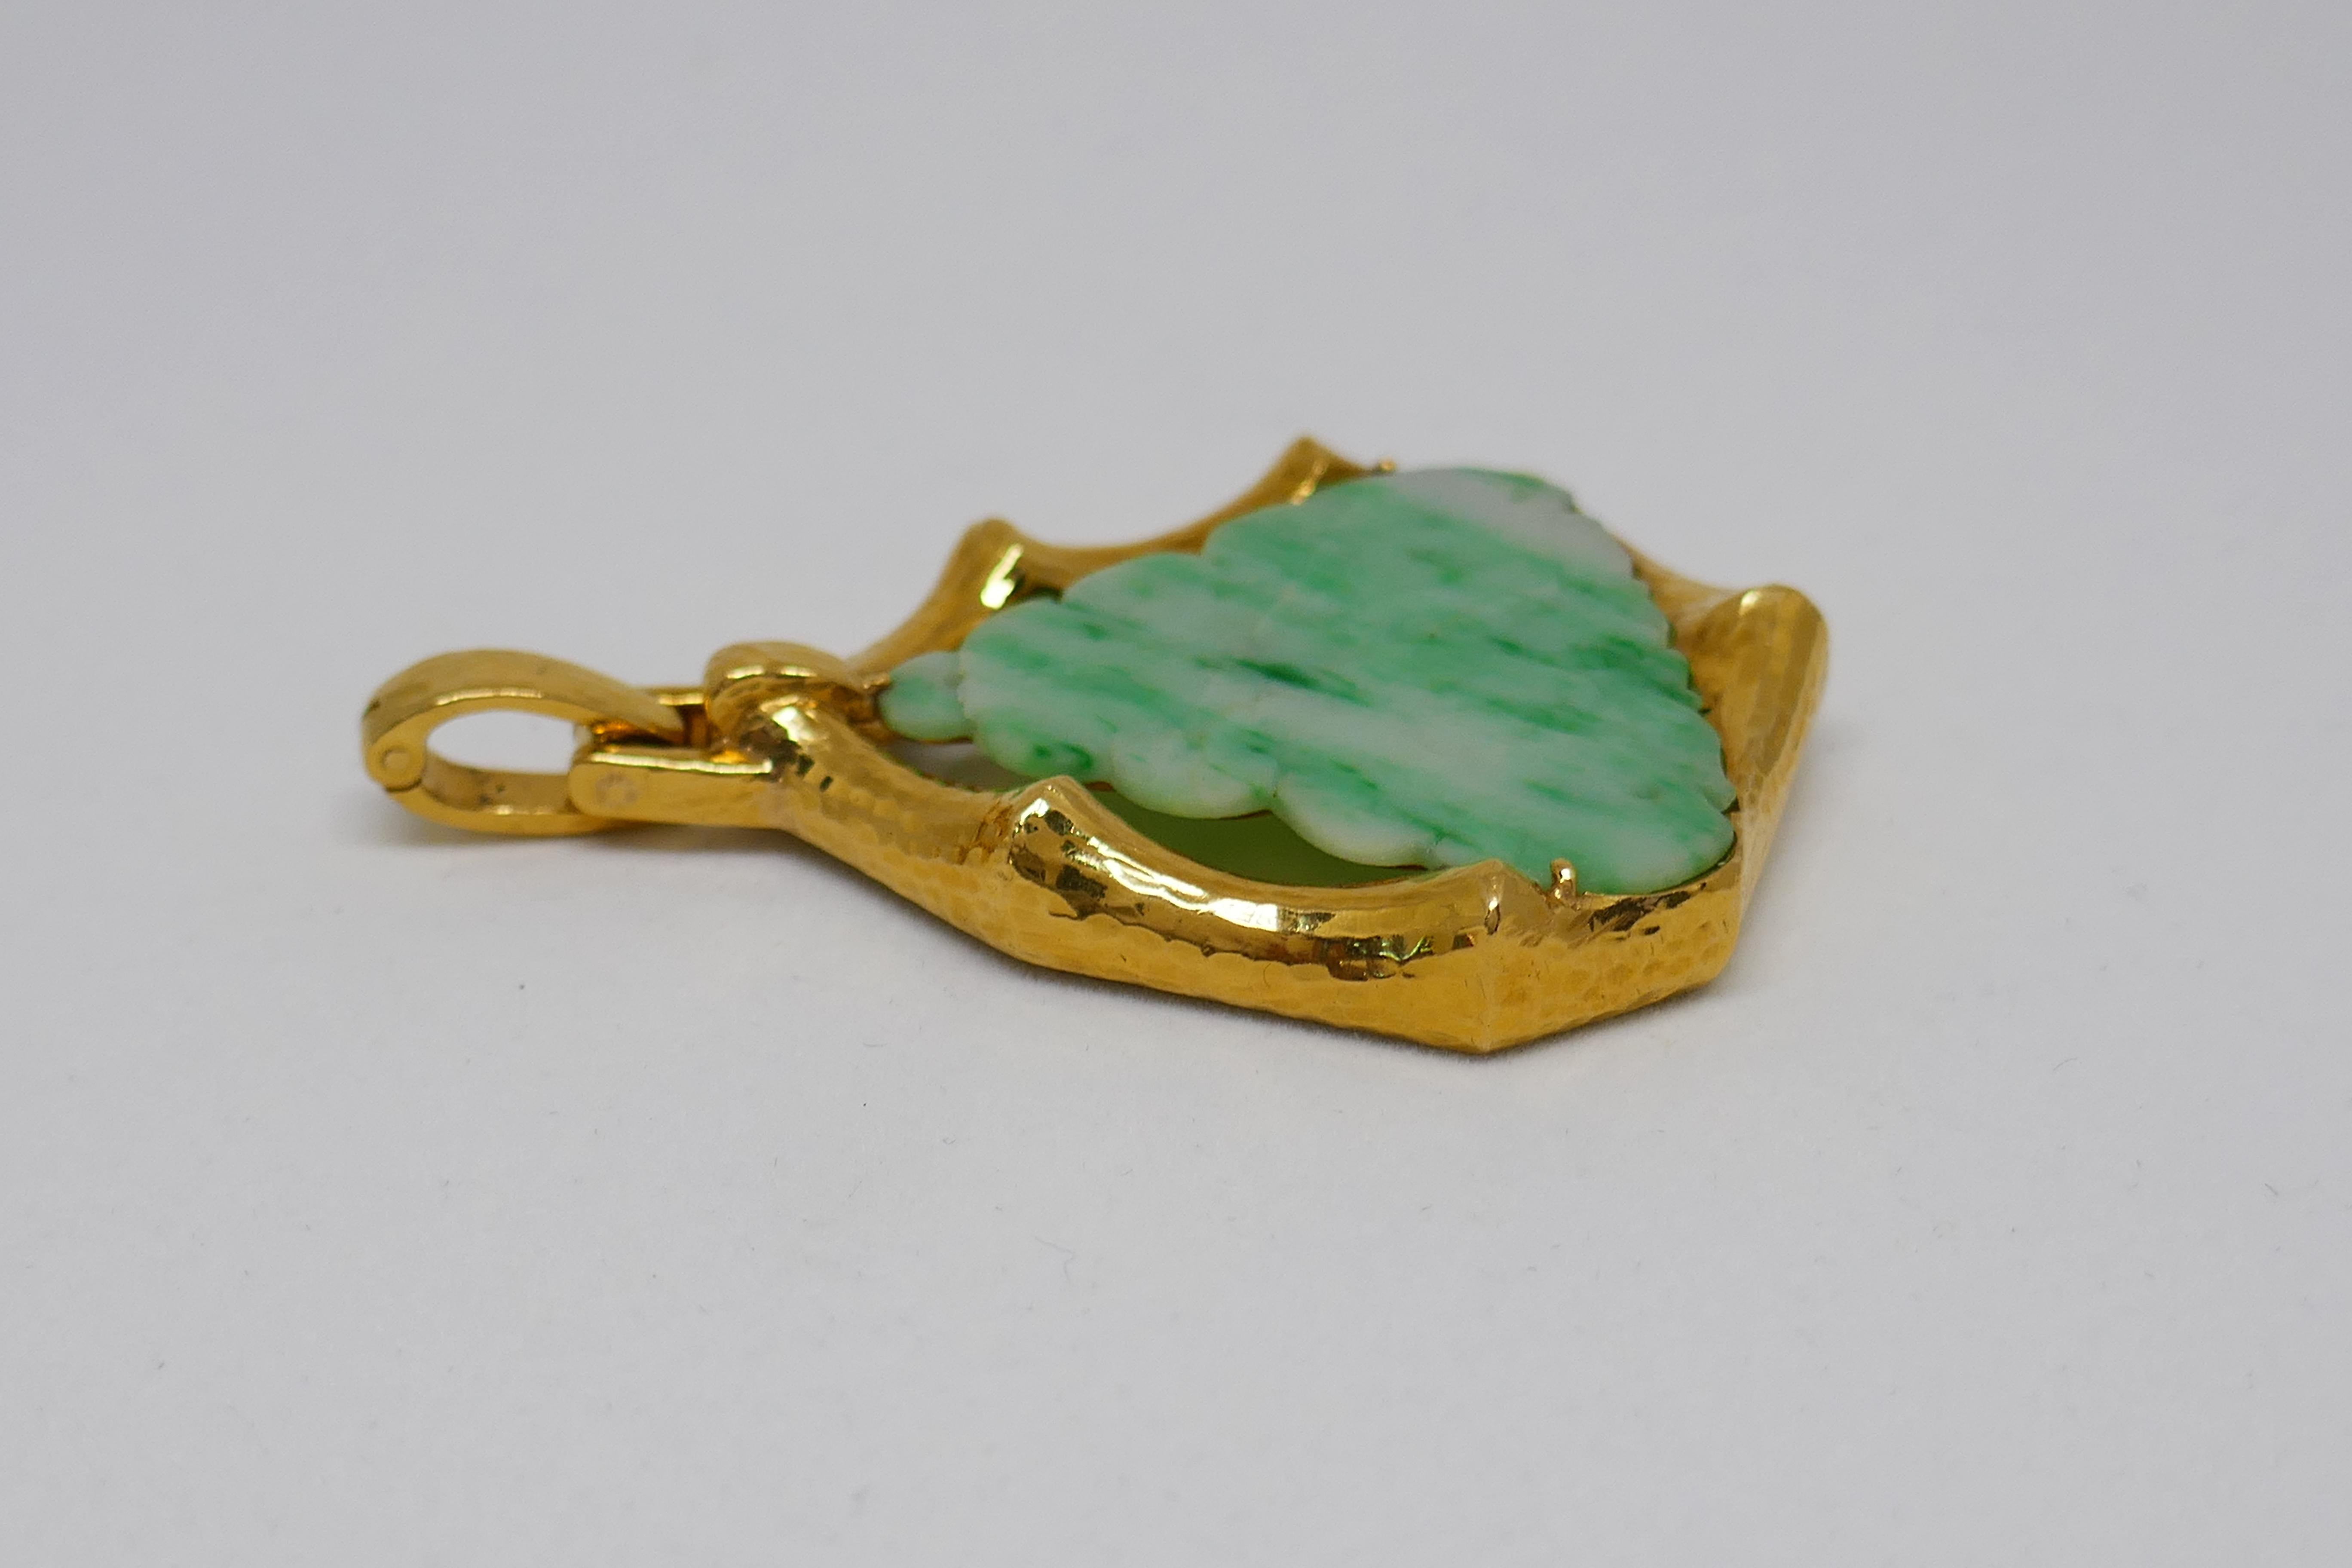 Lovely vintage carved jade pendant created by David Webb. 
The pendant is made of 18 karat (stamped) yellow gold and carved jade. It measures 2 x 1-3/4 inches (5 x 4.5 cm) without bail and 2-1/2 inches (6.5 cm) long with the bail. The pendant weighs